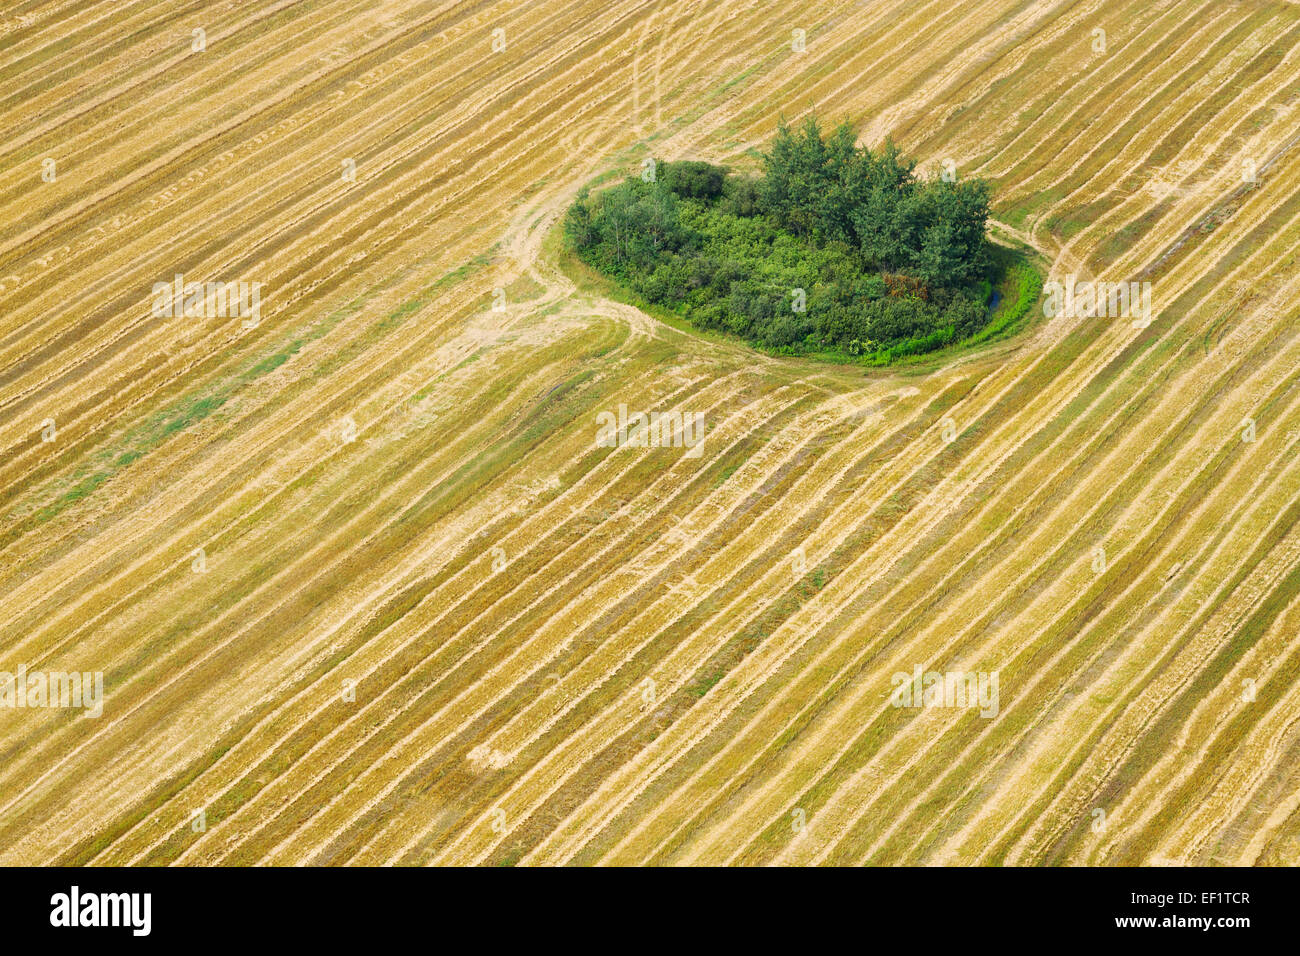 An aerial view of agricultural field Stock Photo